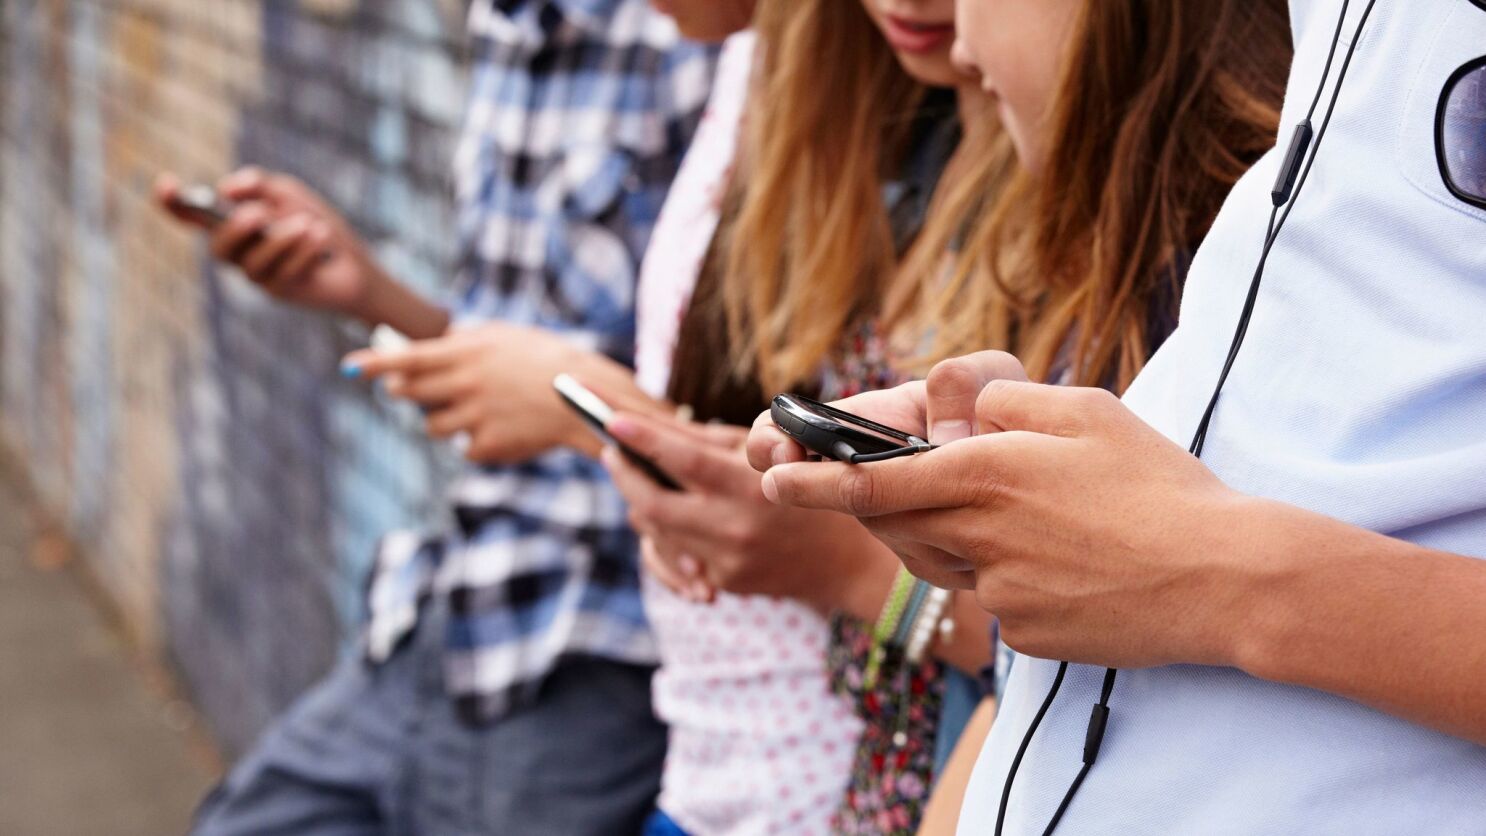 Less smartphone equals happier teenager, study suggests - Los Angeles Times